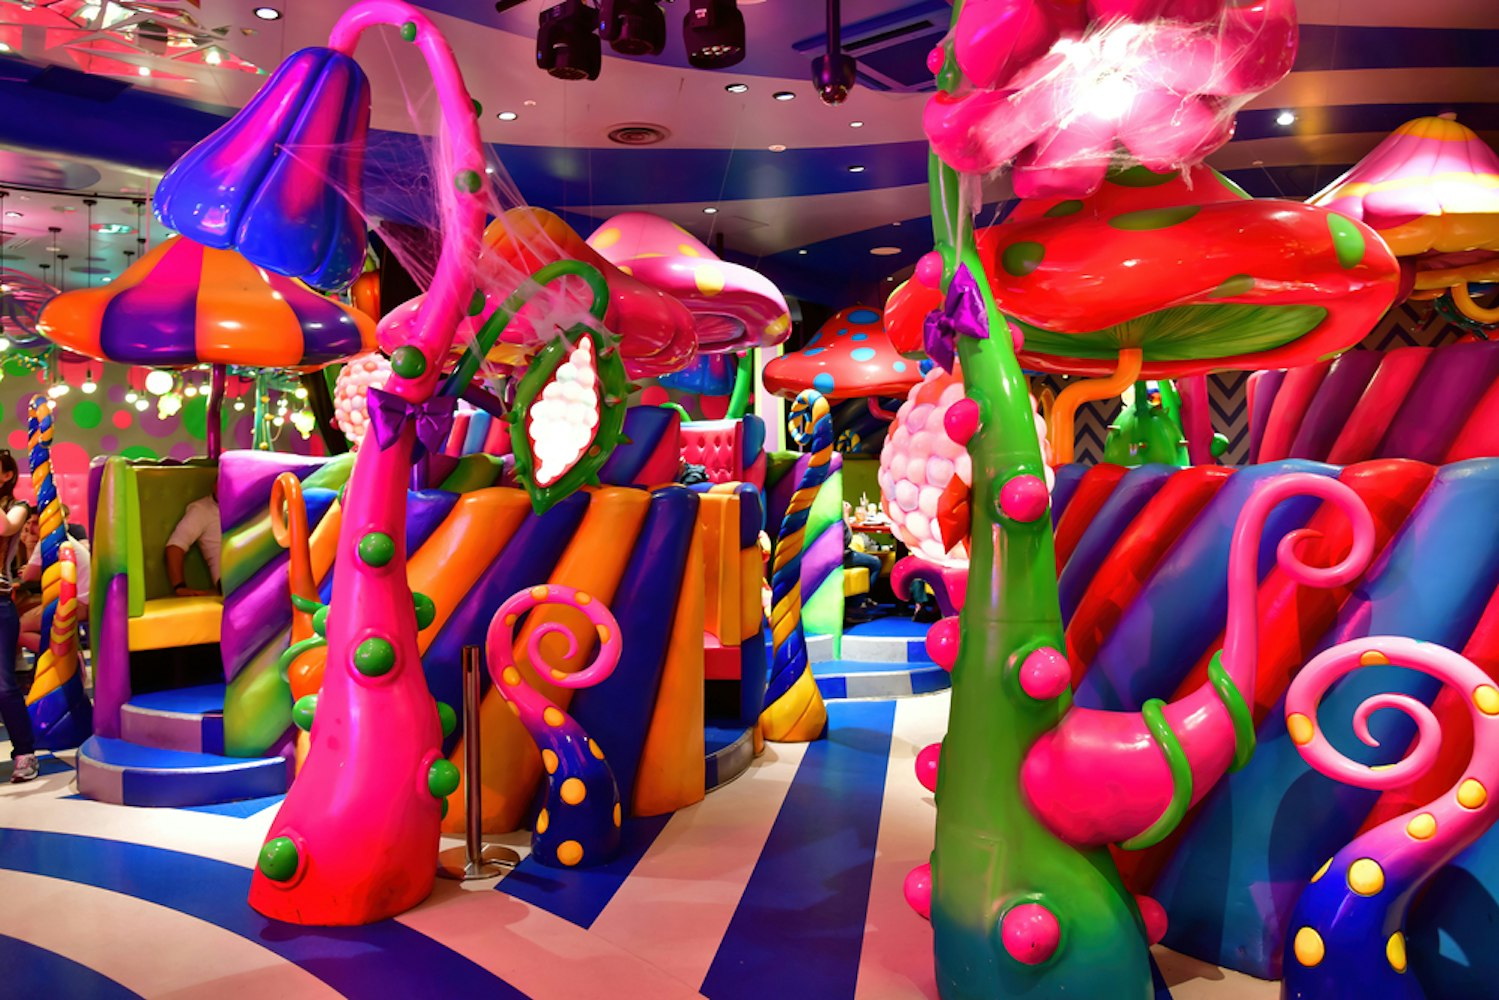 Interior view of the colorful thematic Kawaii Monster Cafe